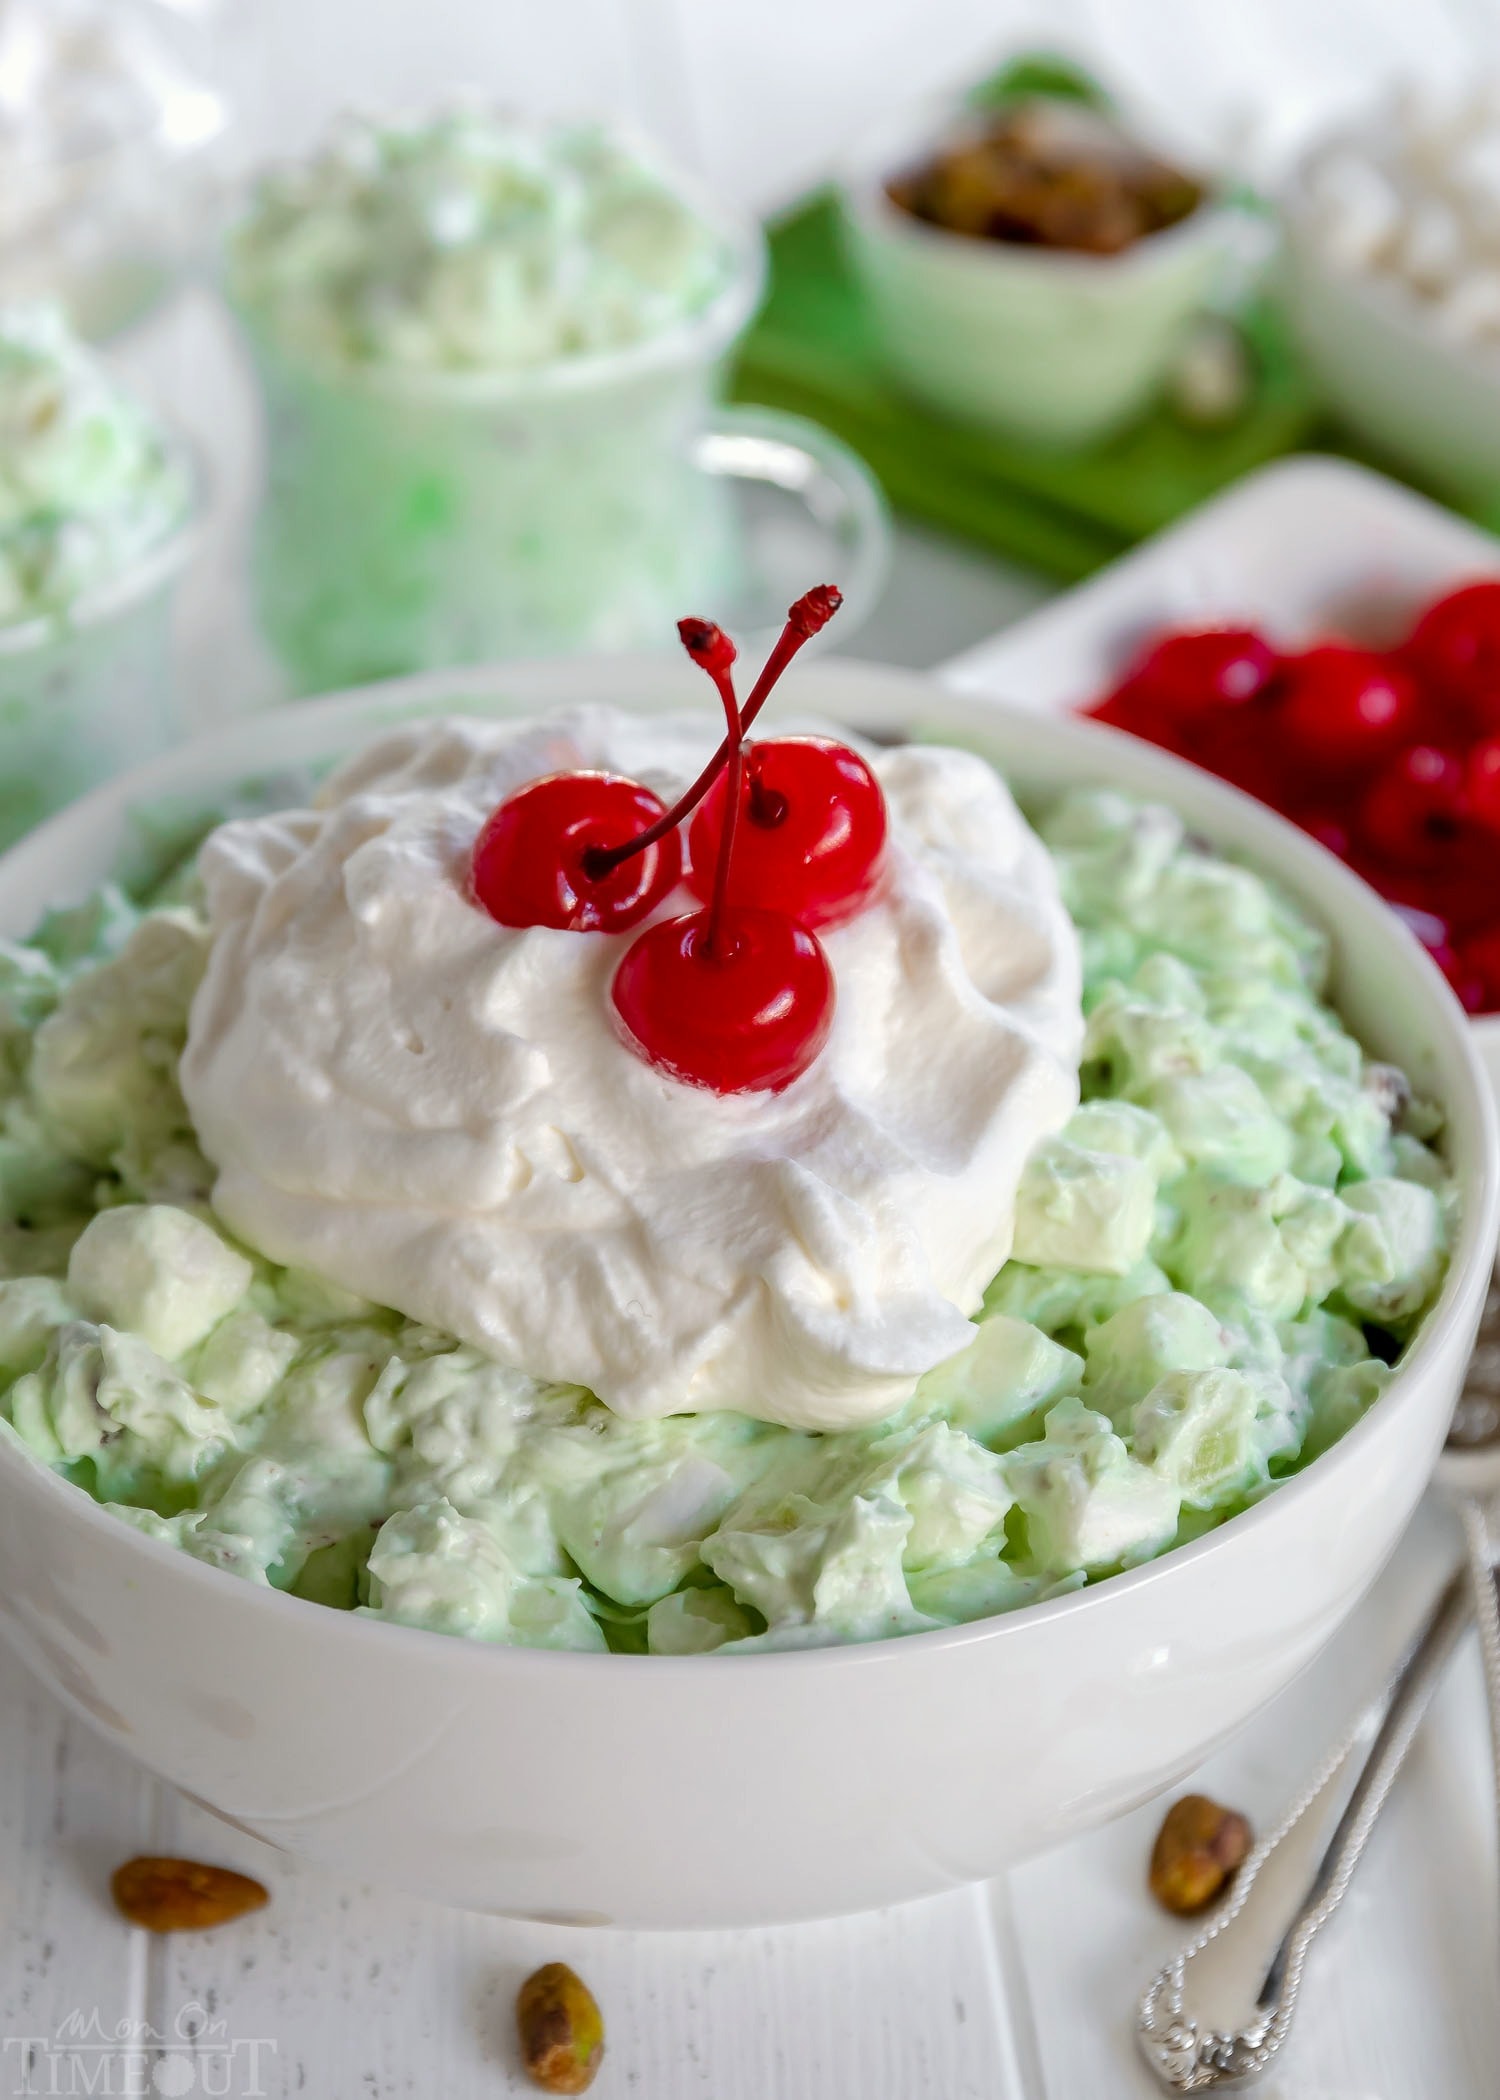 THE BEST WATERGATE SALAD